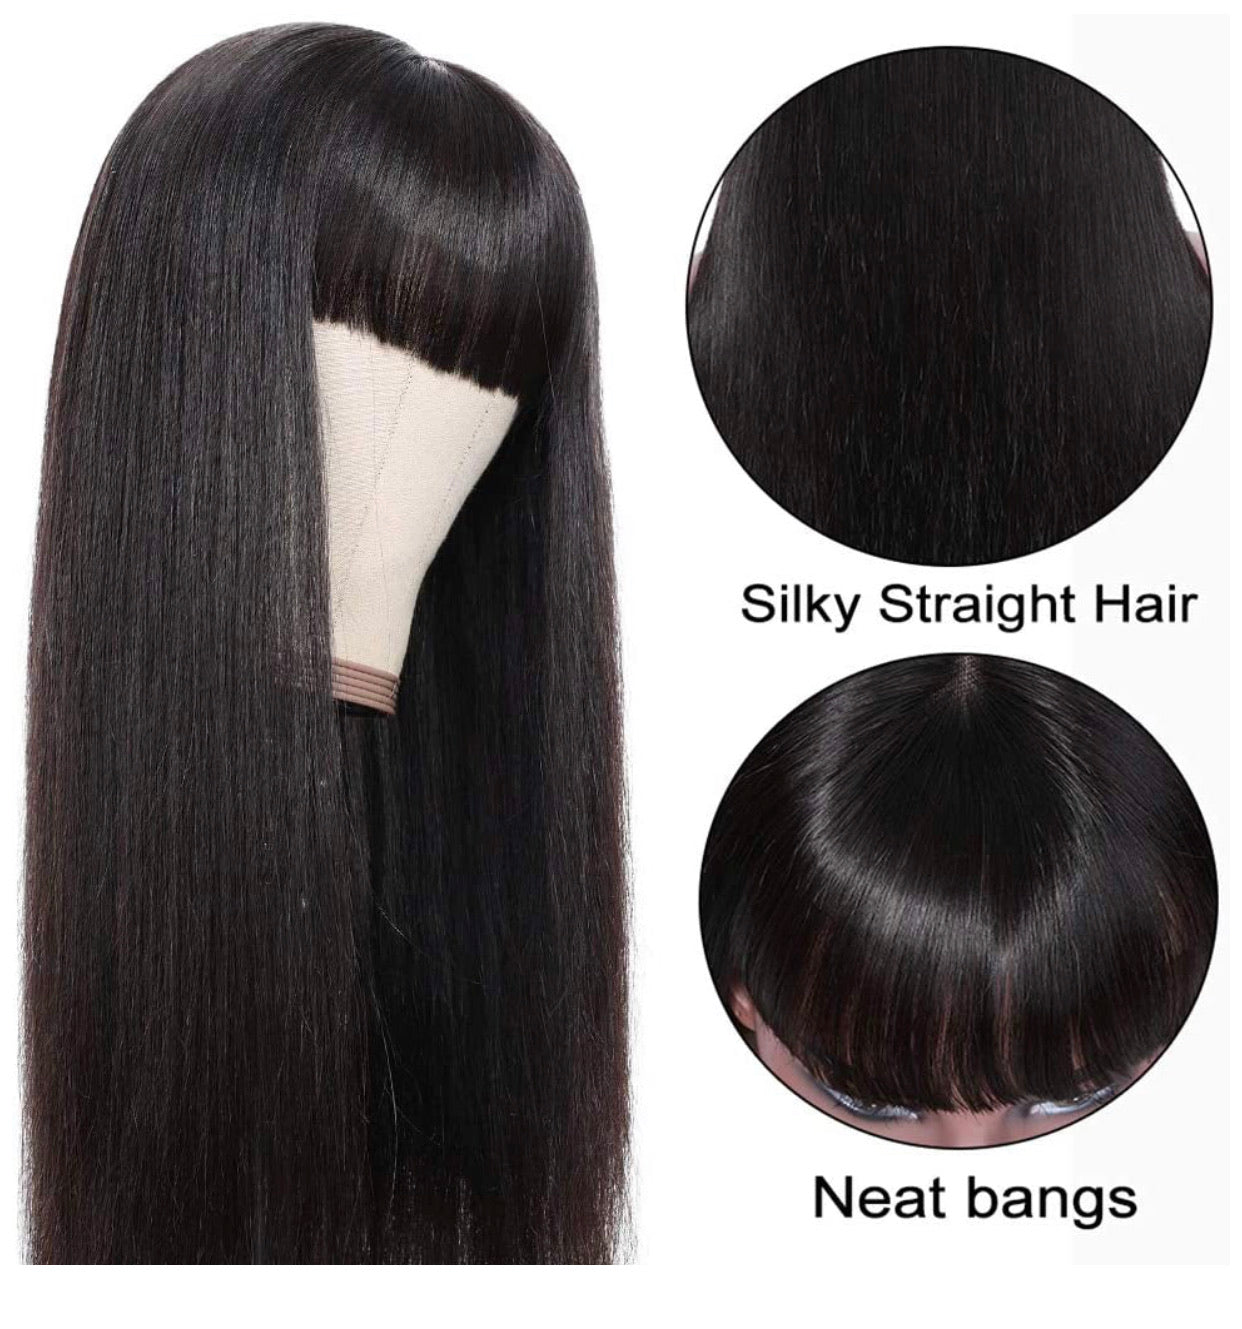 Straight Human Hair Wigs with Bangs (26inch) 9A None Lace Front Wigs Human Hair for Black Women 150% Density Glueless Machine Made Brazilian Remy Hair..